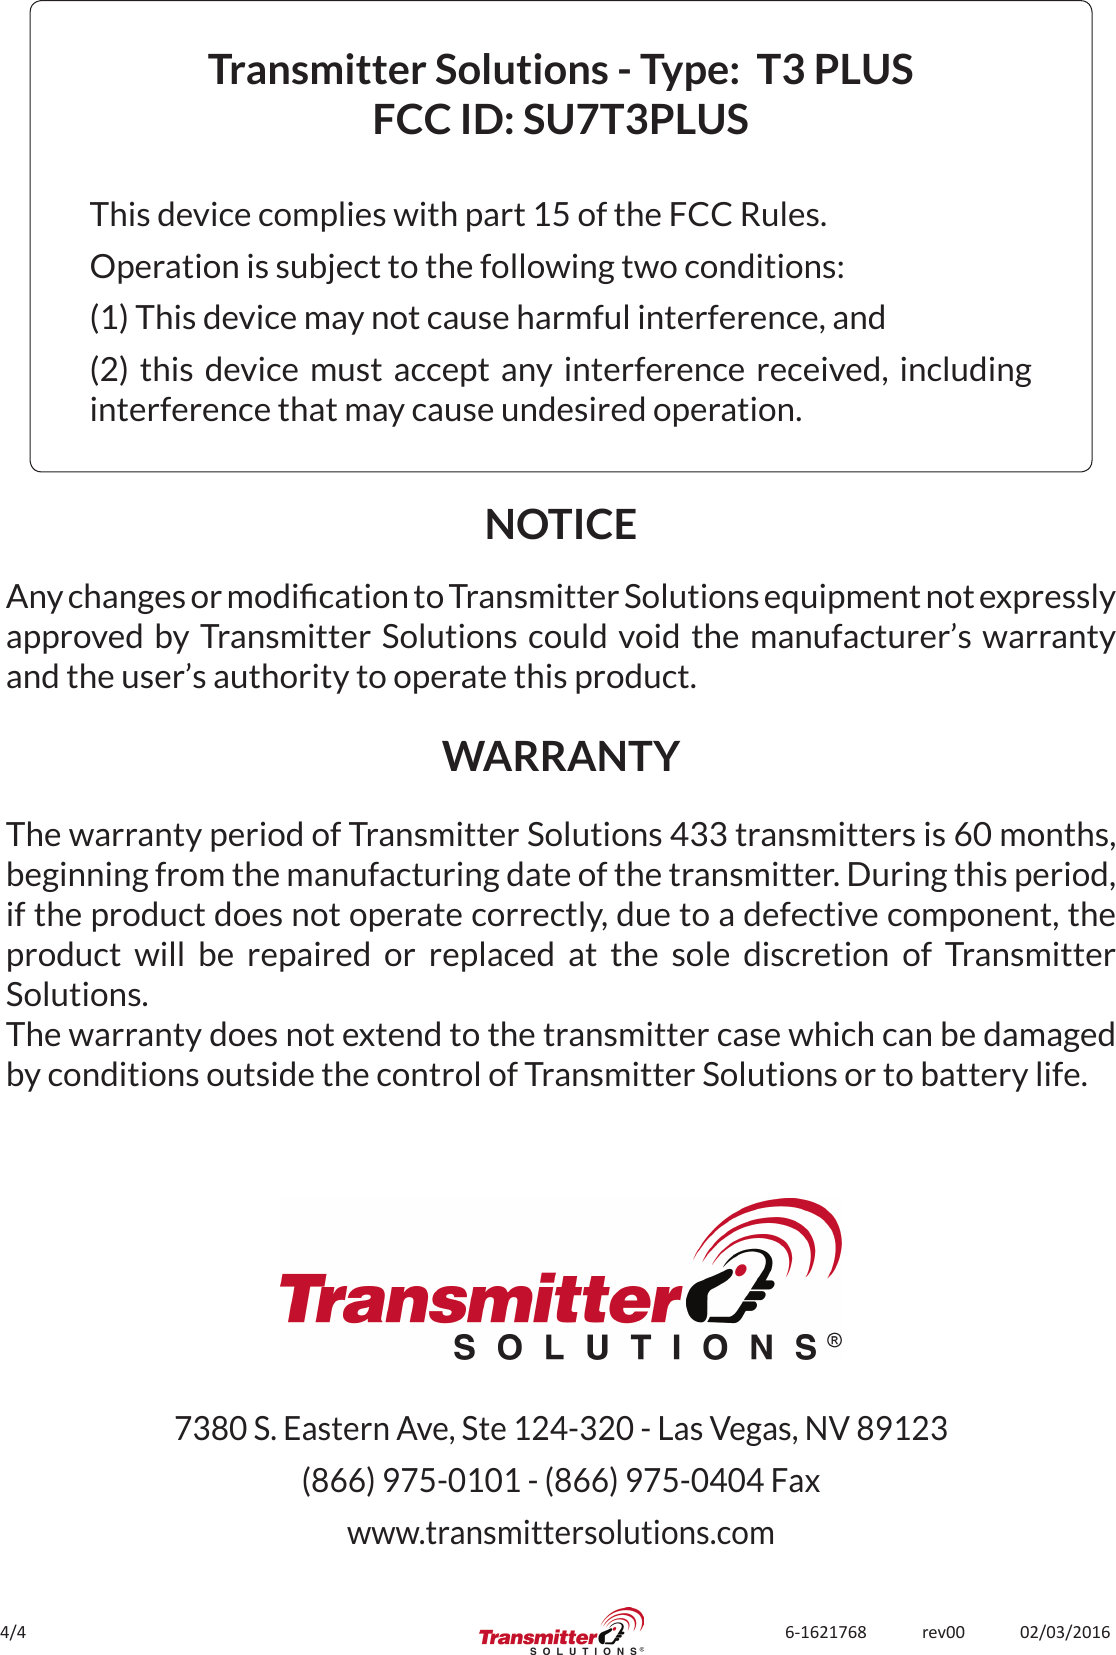 4/4 6-1621768             rev00             02/03/2016Transmitter Solutions - Type:  T3 PLUSFCC ID: SU7T3PLUSThis device complies with part 15 of the FCC Rules.Operation is subject to the following two conditions:(1) This device may not cause harmful interference, and(2) this device must accept any interference received, including interference that may cause undesired operation.The warranty period of Transmitter Solutions 433 transmitters is 60 months, beginning from the manufacturing date of the transmitter. During this period, if the product does not operate correctly, due to a defective component, the product will be repaired or replaced at the sole discretion of Transmitter Solutions. The warranty does not extend to the transmitter case which can be damaged by conditions outside the control of Transmitter Solutions or to battery life.NOTICEWARRANTYAny changes or modication to Transmitter Solutions equipment not expressly approved by Transmitter Solutions could void the manufacturer’s warranty and the user’s authority to operate this product.7380 S. Eastern Ave, Ste 124-320 - Las Vegas, NV 89123(866) 975-0101 - (866) 975-0404 Faxwww.transmittersolutions.com